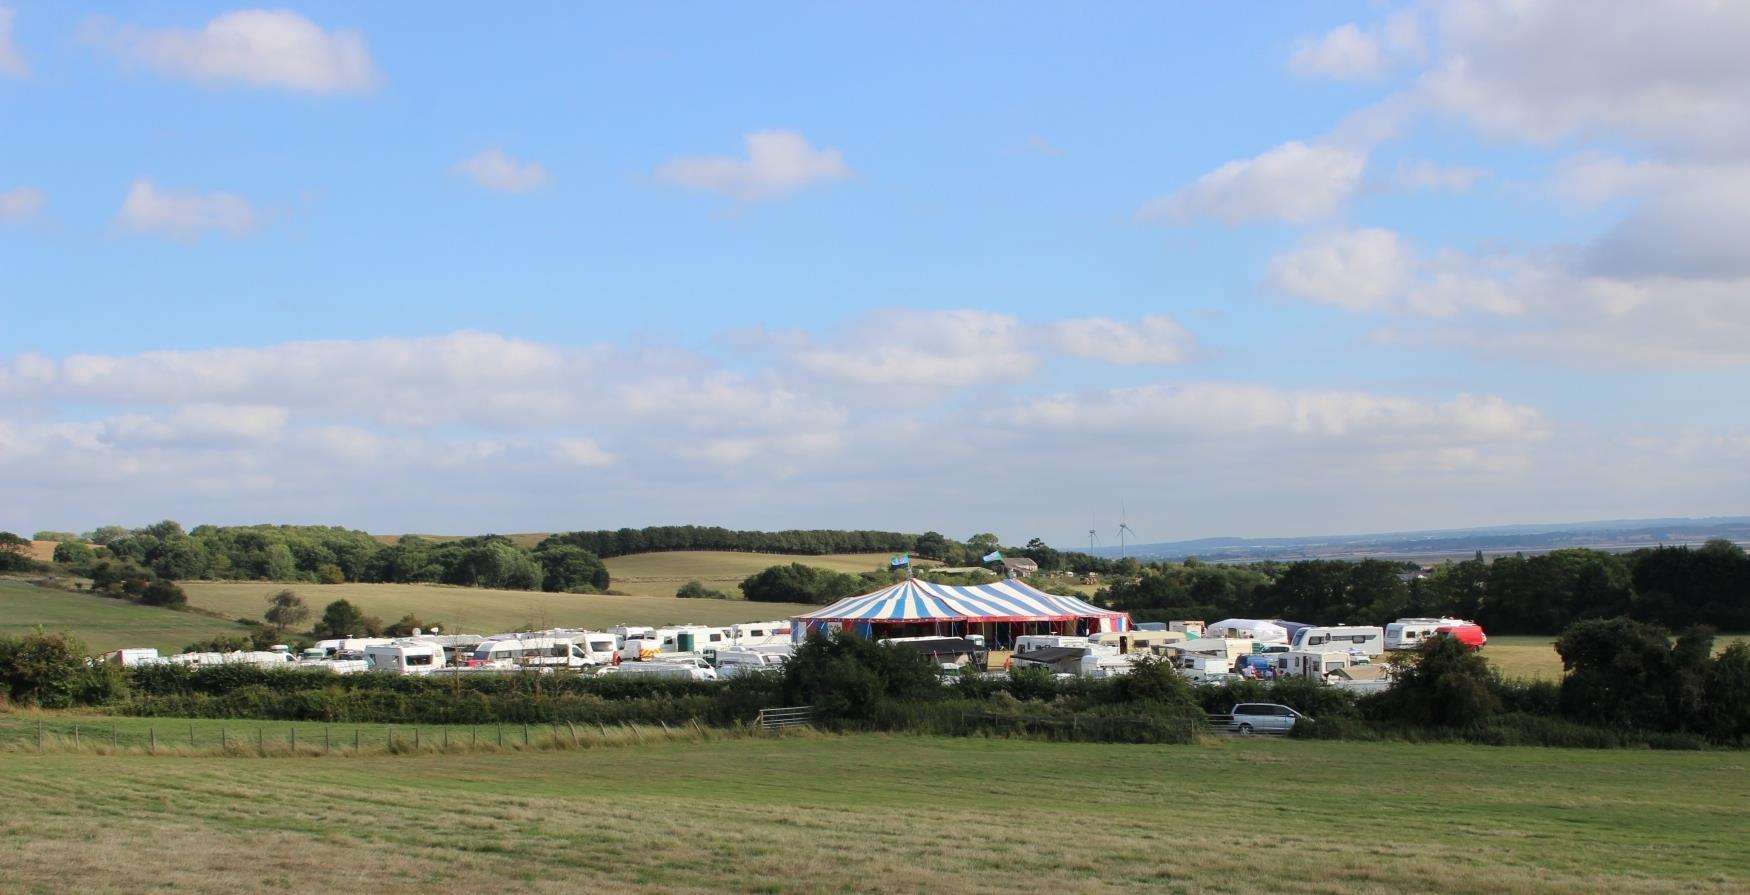 The temporary gypsy encampment in Elm Lane, Minster, on the Isle of Sheppey (3750307)